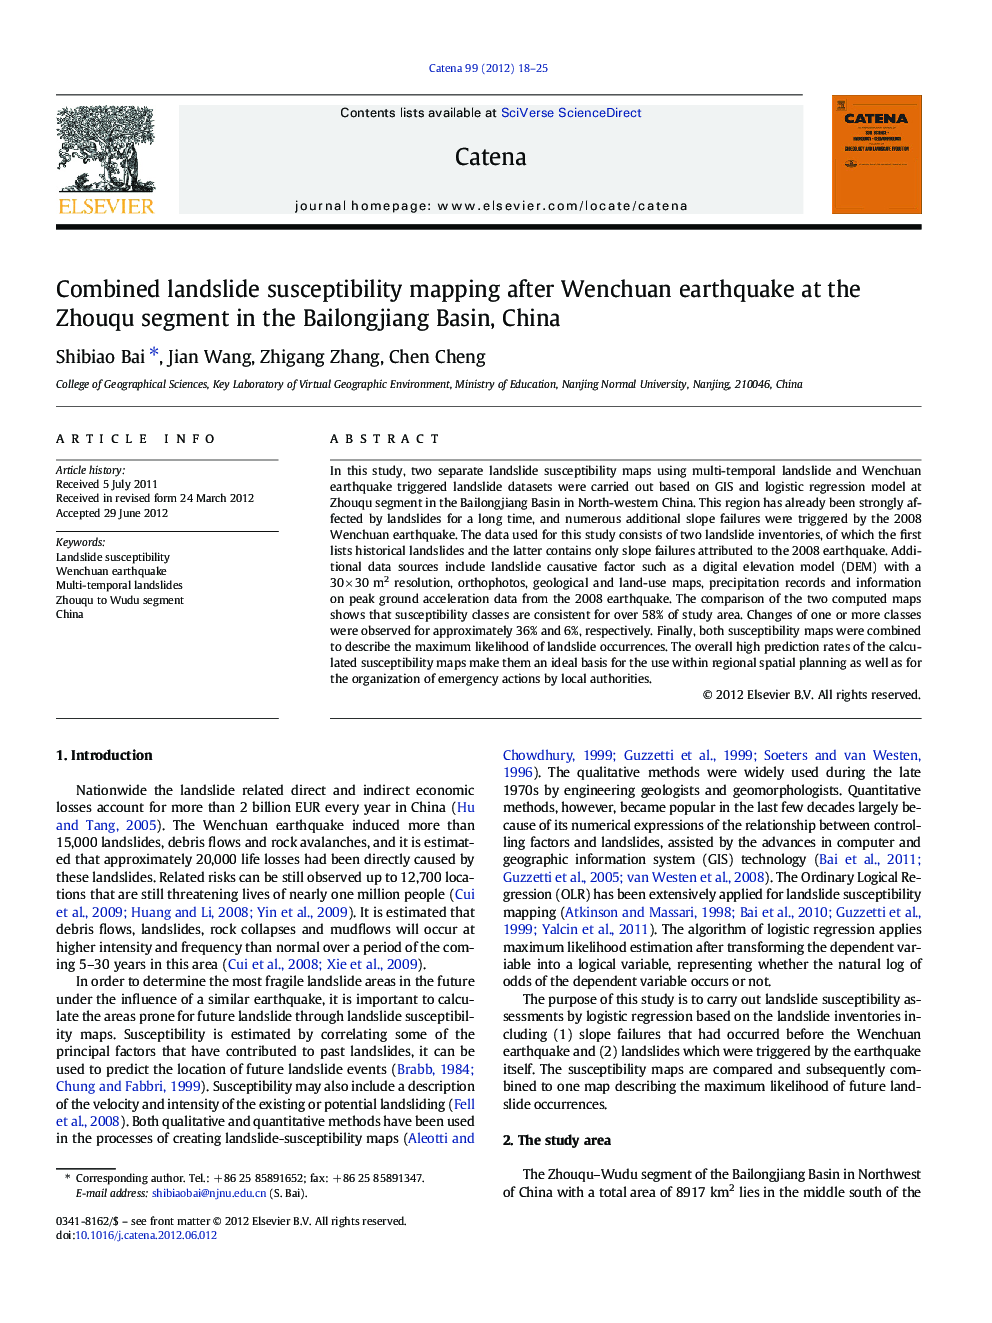 Combined landslide susceptibility mapping after Wenchuan earthquake at the Zhouqu segment in the Bailongjiang Basin, China